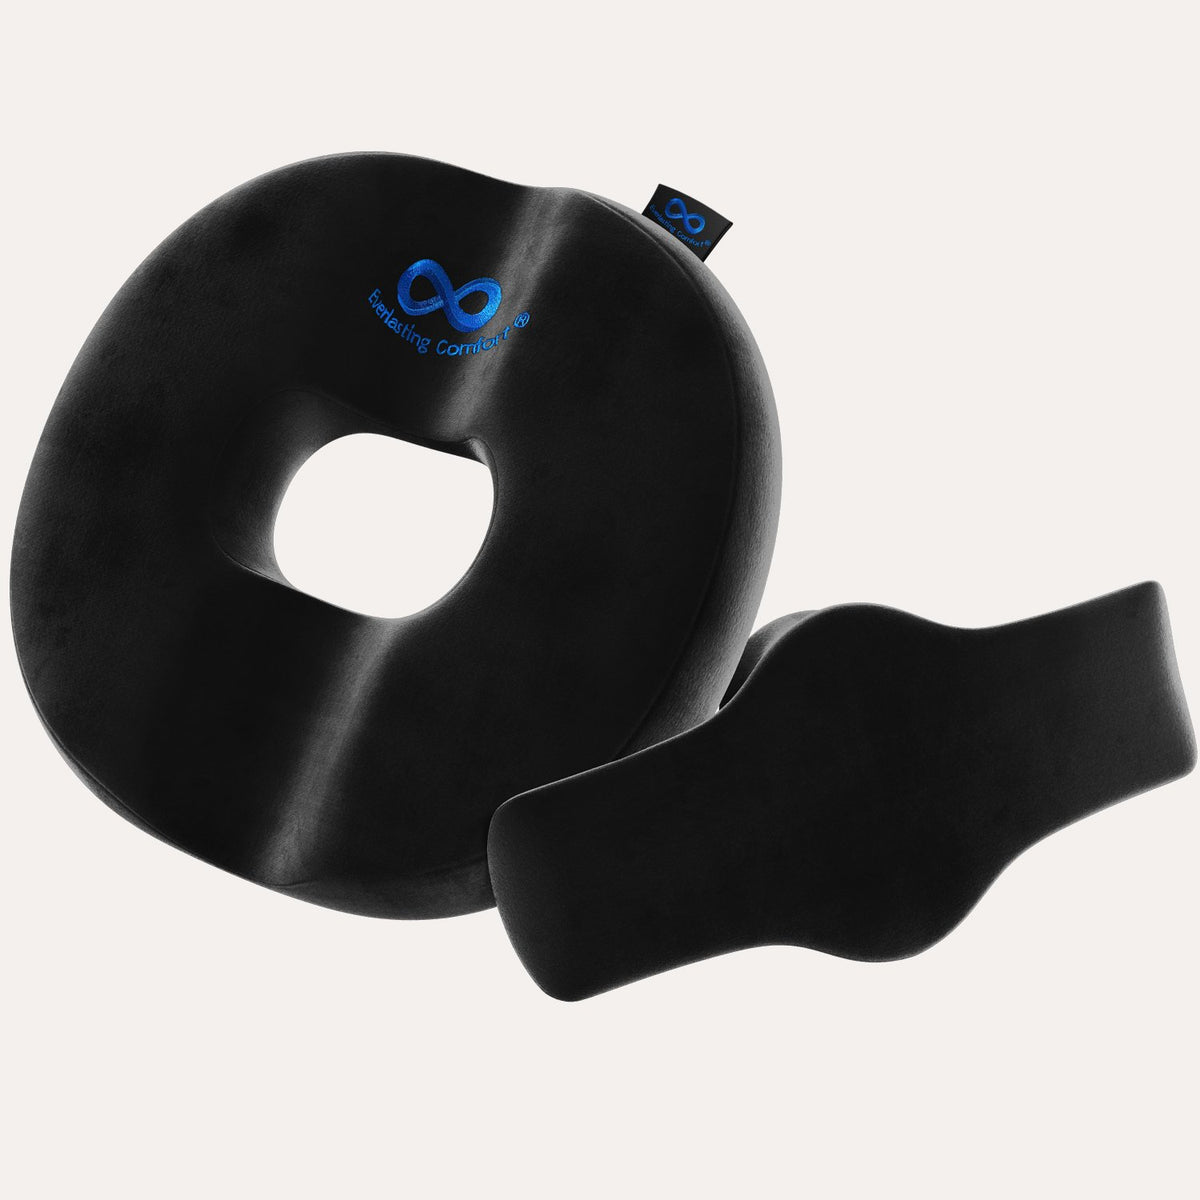 Achilles Tendon Support Pillow - Gel Infused - Upper Echelon Products